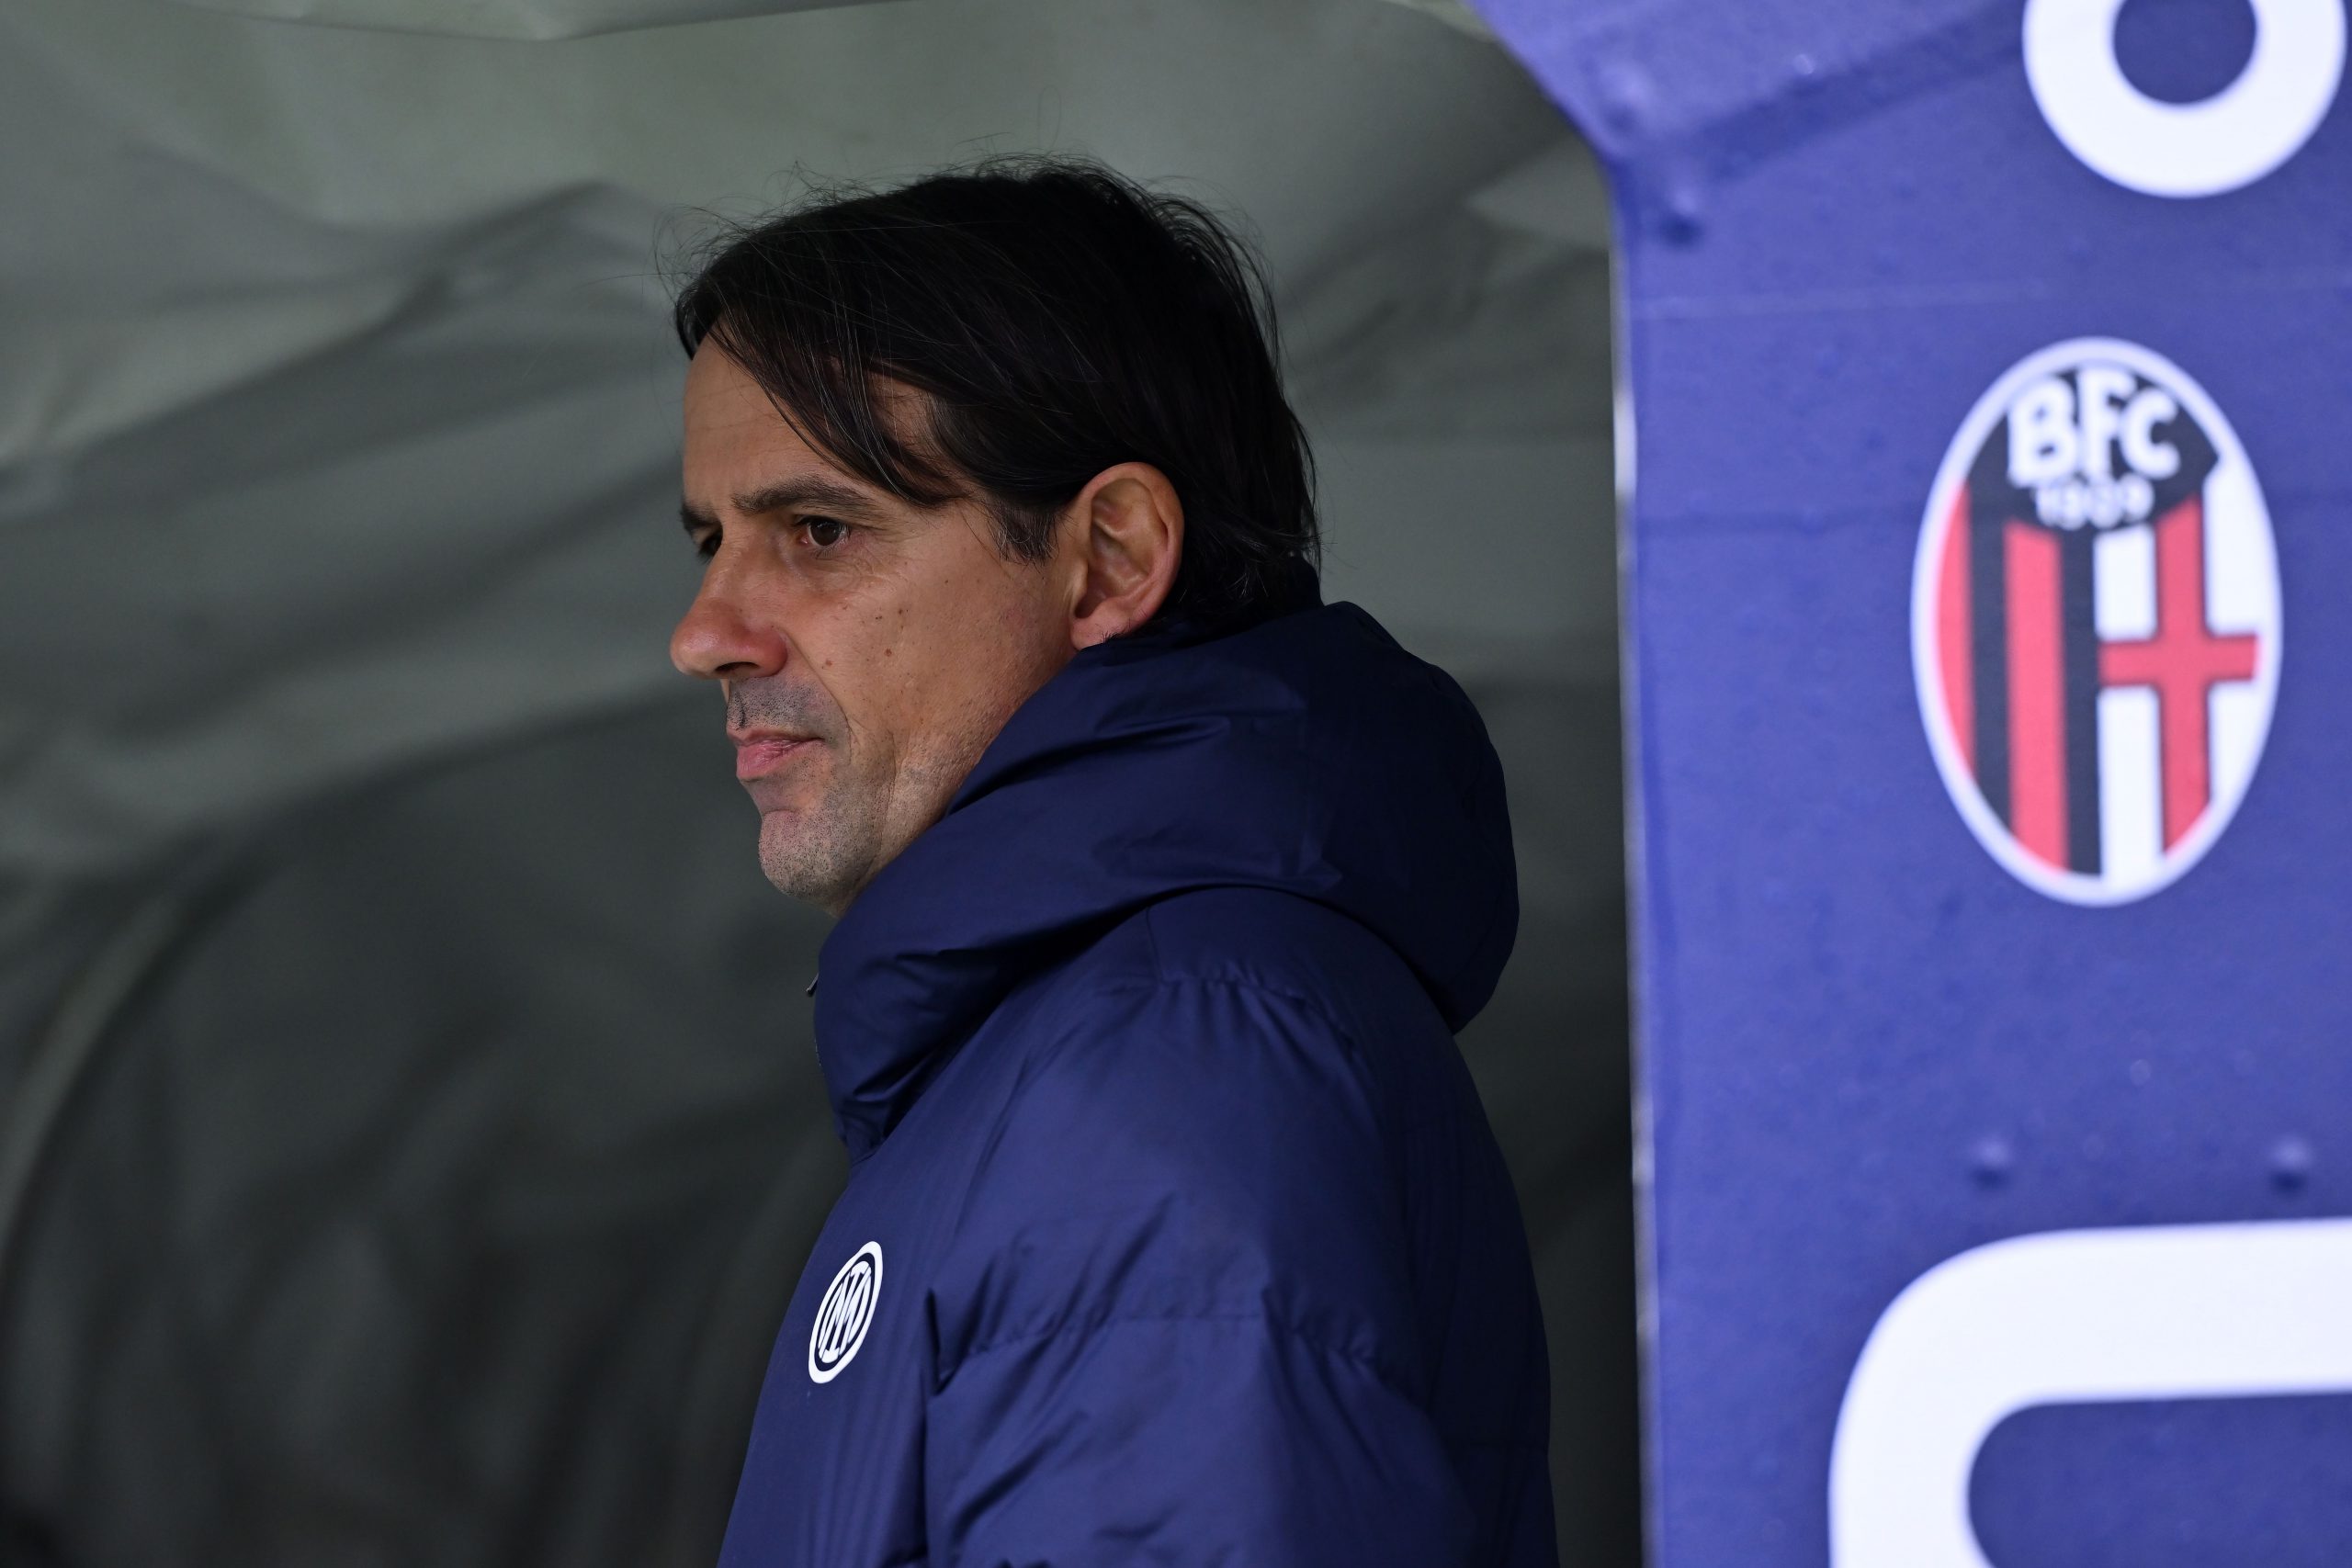 Simone Inzaghi in Bologna-Inter di Serie A (Photo by Alessandro Sabattini/Getty Images via OneFootball)